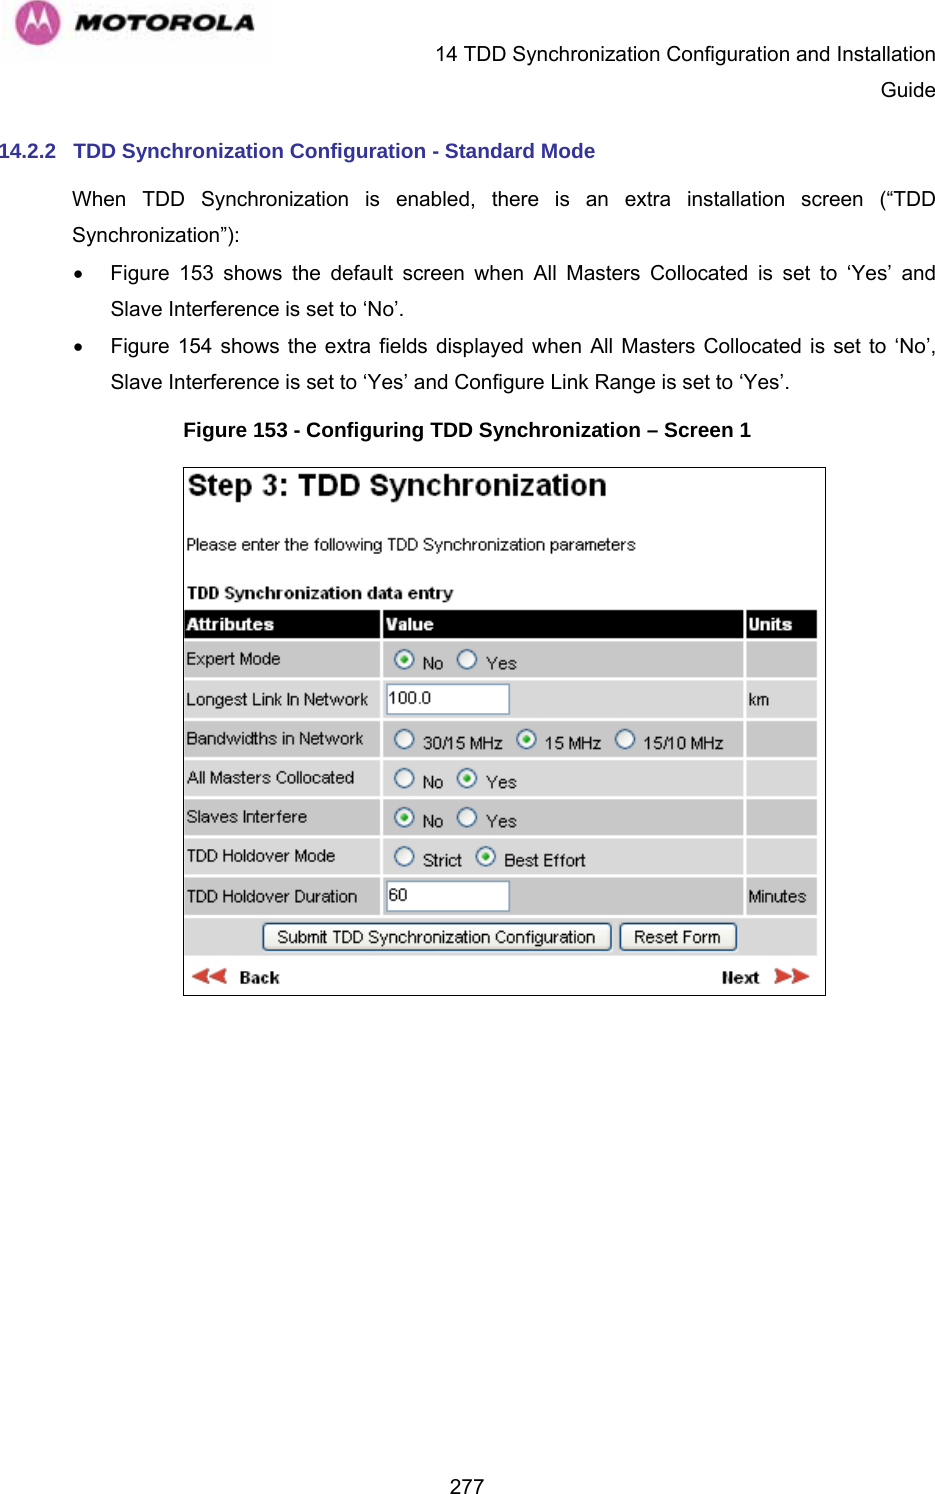   14 TDD Synchronization Configuration and Installation Guide  27714.2.2  TDD Synchronization Configuration - Standard Mode When TDD Synchronization is enabled, there is an extra installation screen (“TDD Synchronization”): • Figure 153 shows the default screen when All Masters Collocated is set to ‘Yes’ and Slave Interference is set to ‘No’. • Figure 154 shows the extra fields displayed when All Masters Collocated is set to ‘No’,  Slave Interference is set to ‘Yes’ and Configure Link Range is set to ‘Yes’. Figure 153 - Configuring TDD Synchronization – Screen 1  